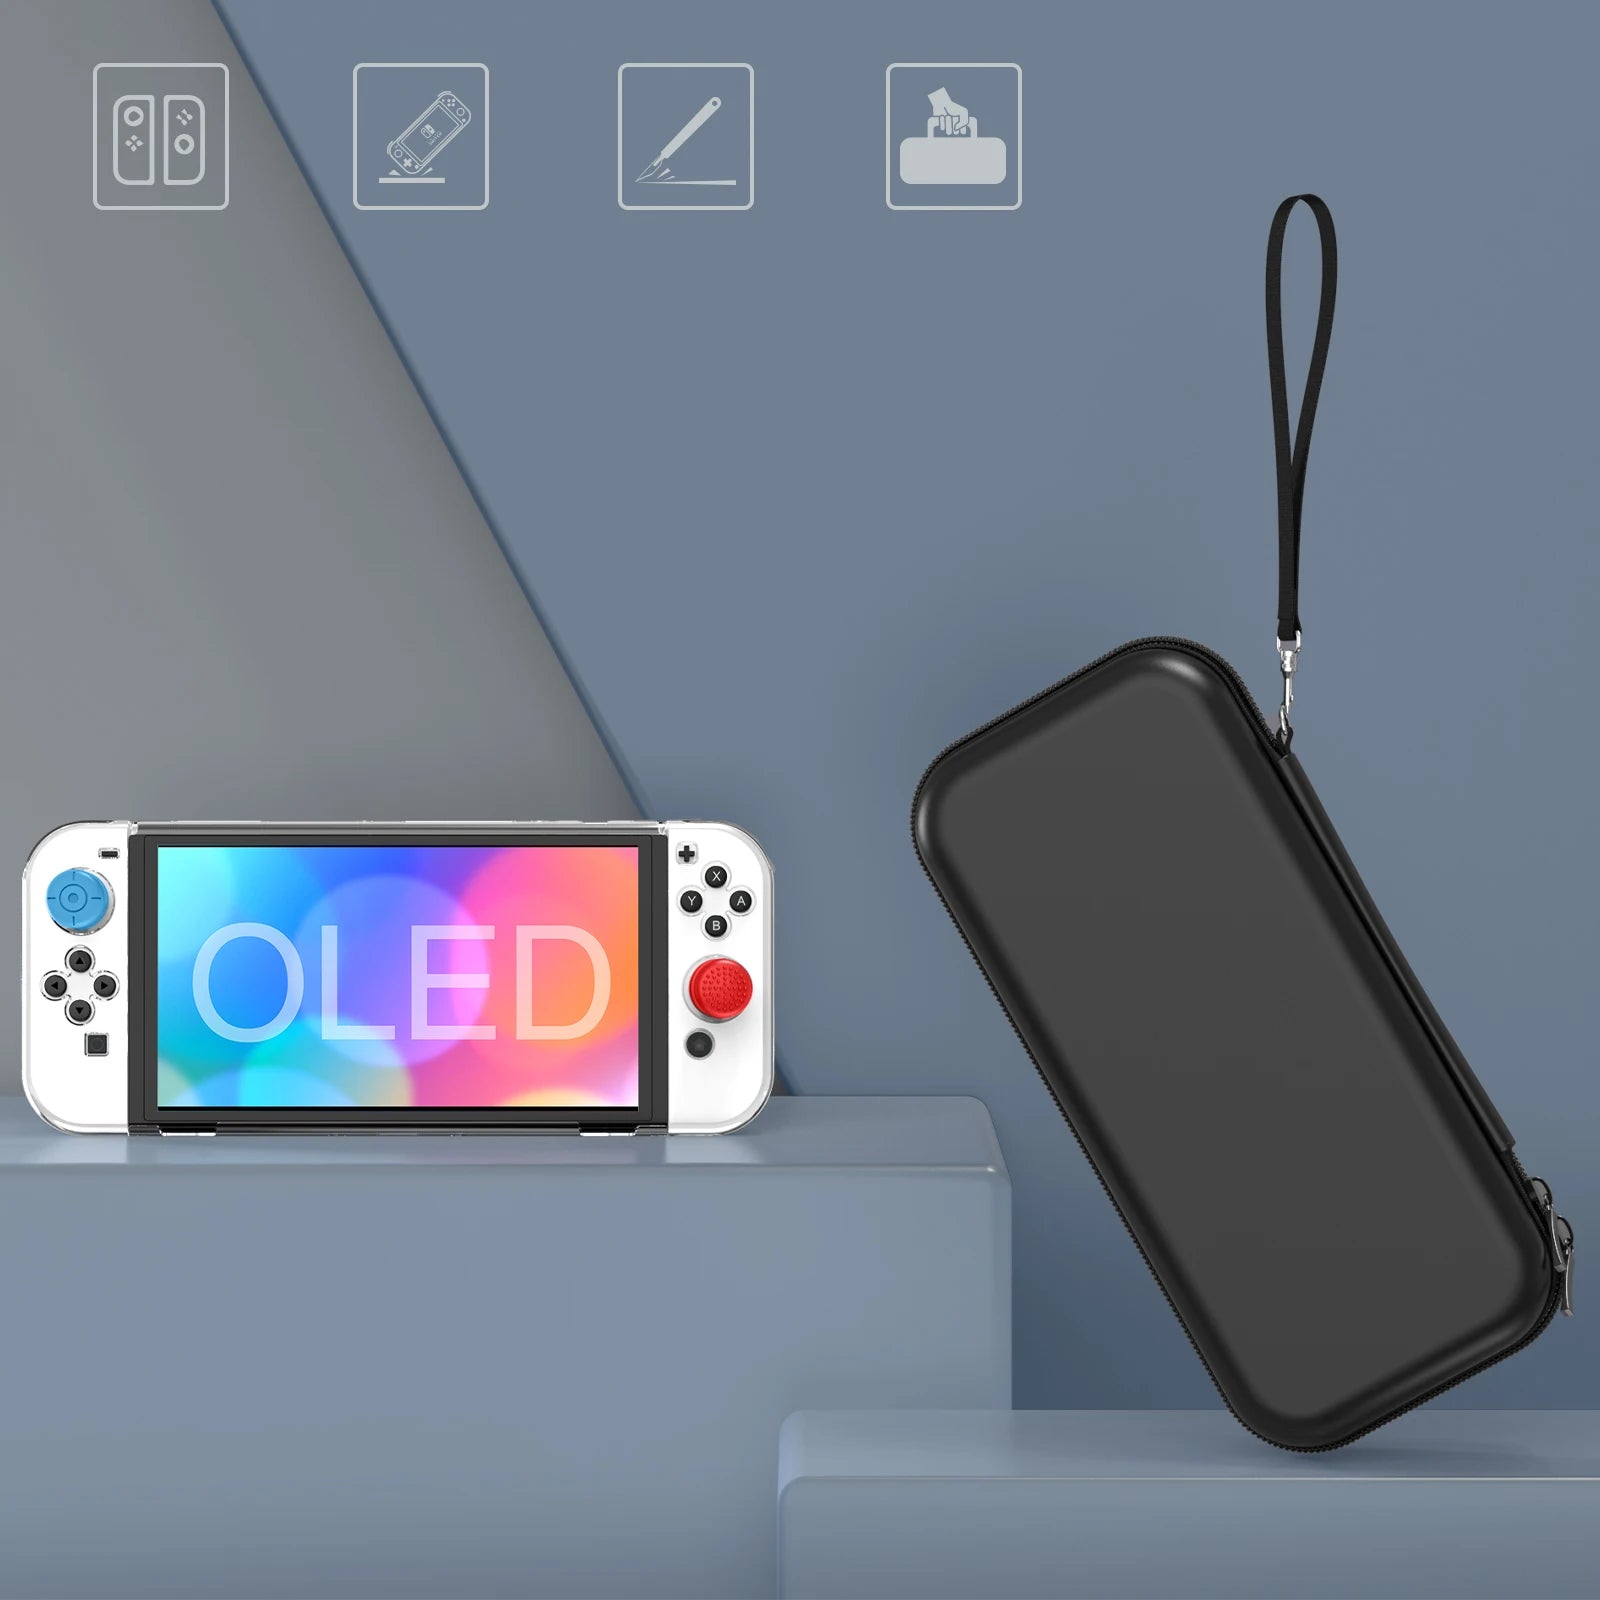 Switch OLED Model Carrying Case 9 in 1 Accessories Kit 